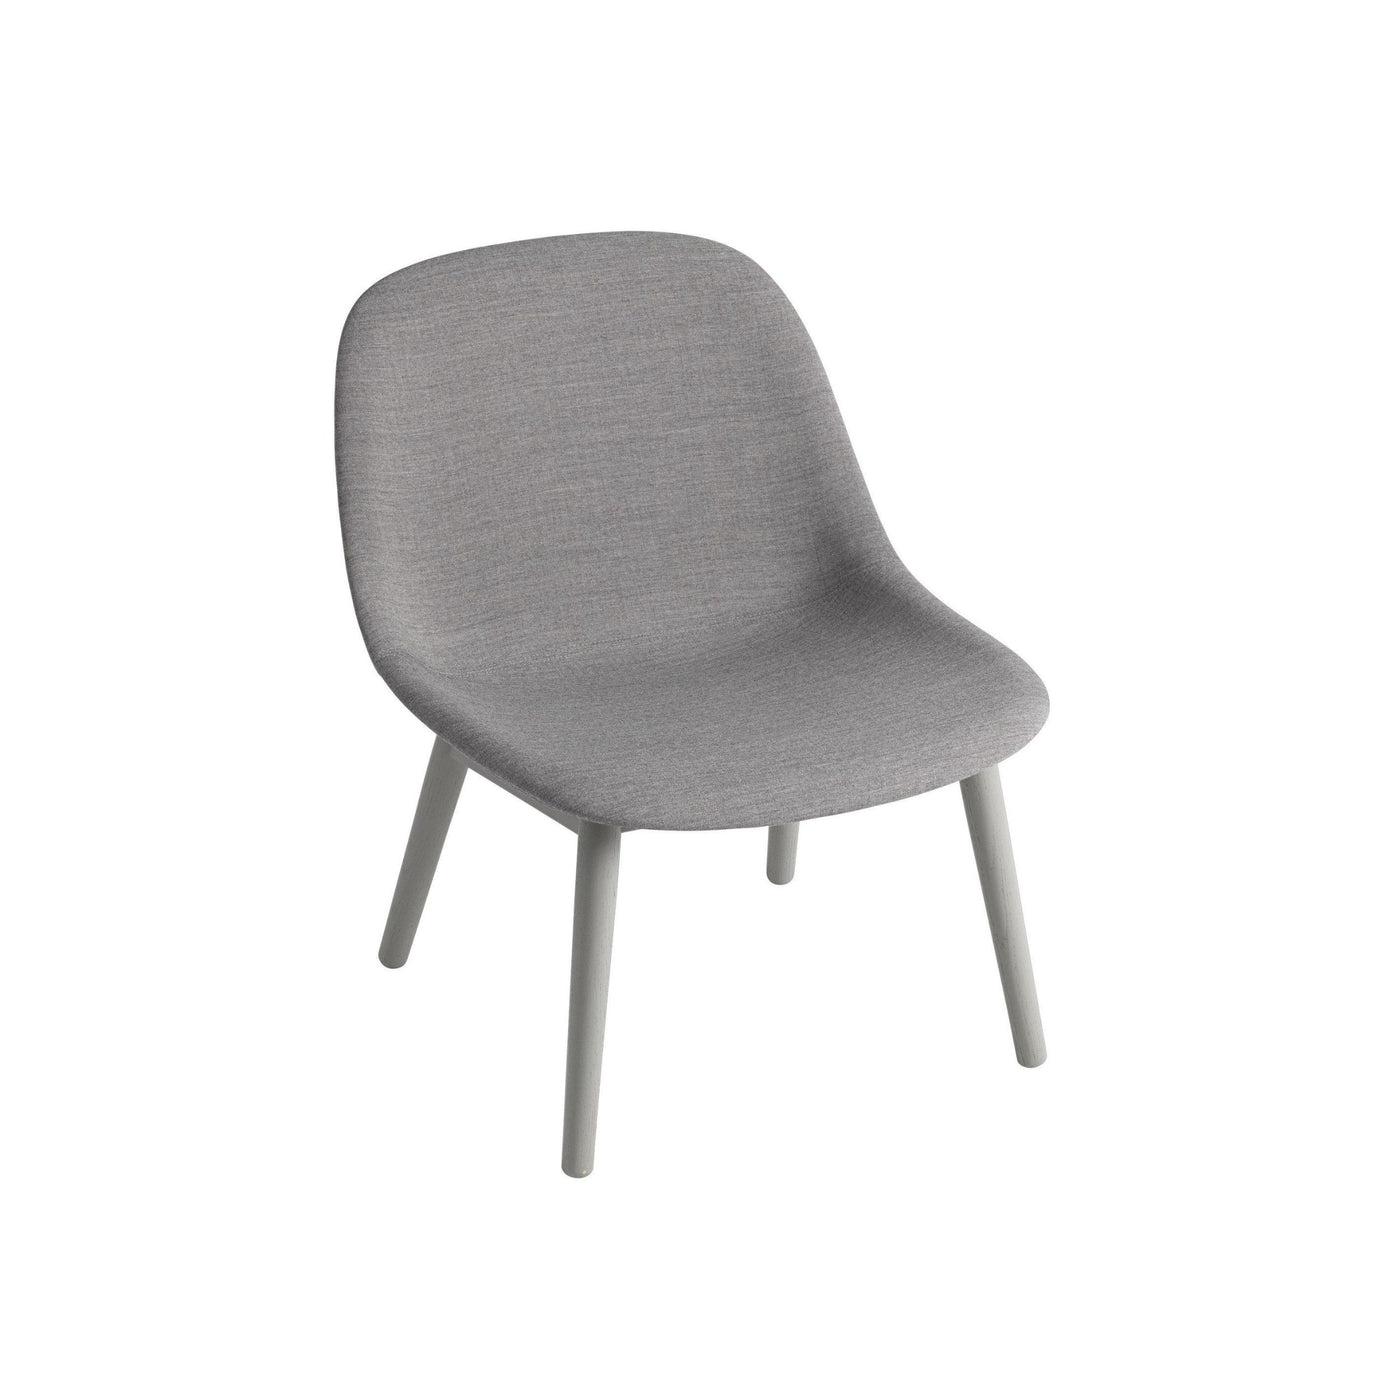 muuto fiber lounge chair wood base remix 133 grey available from someday designs. #colour_remix-133